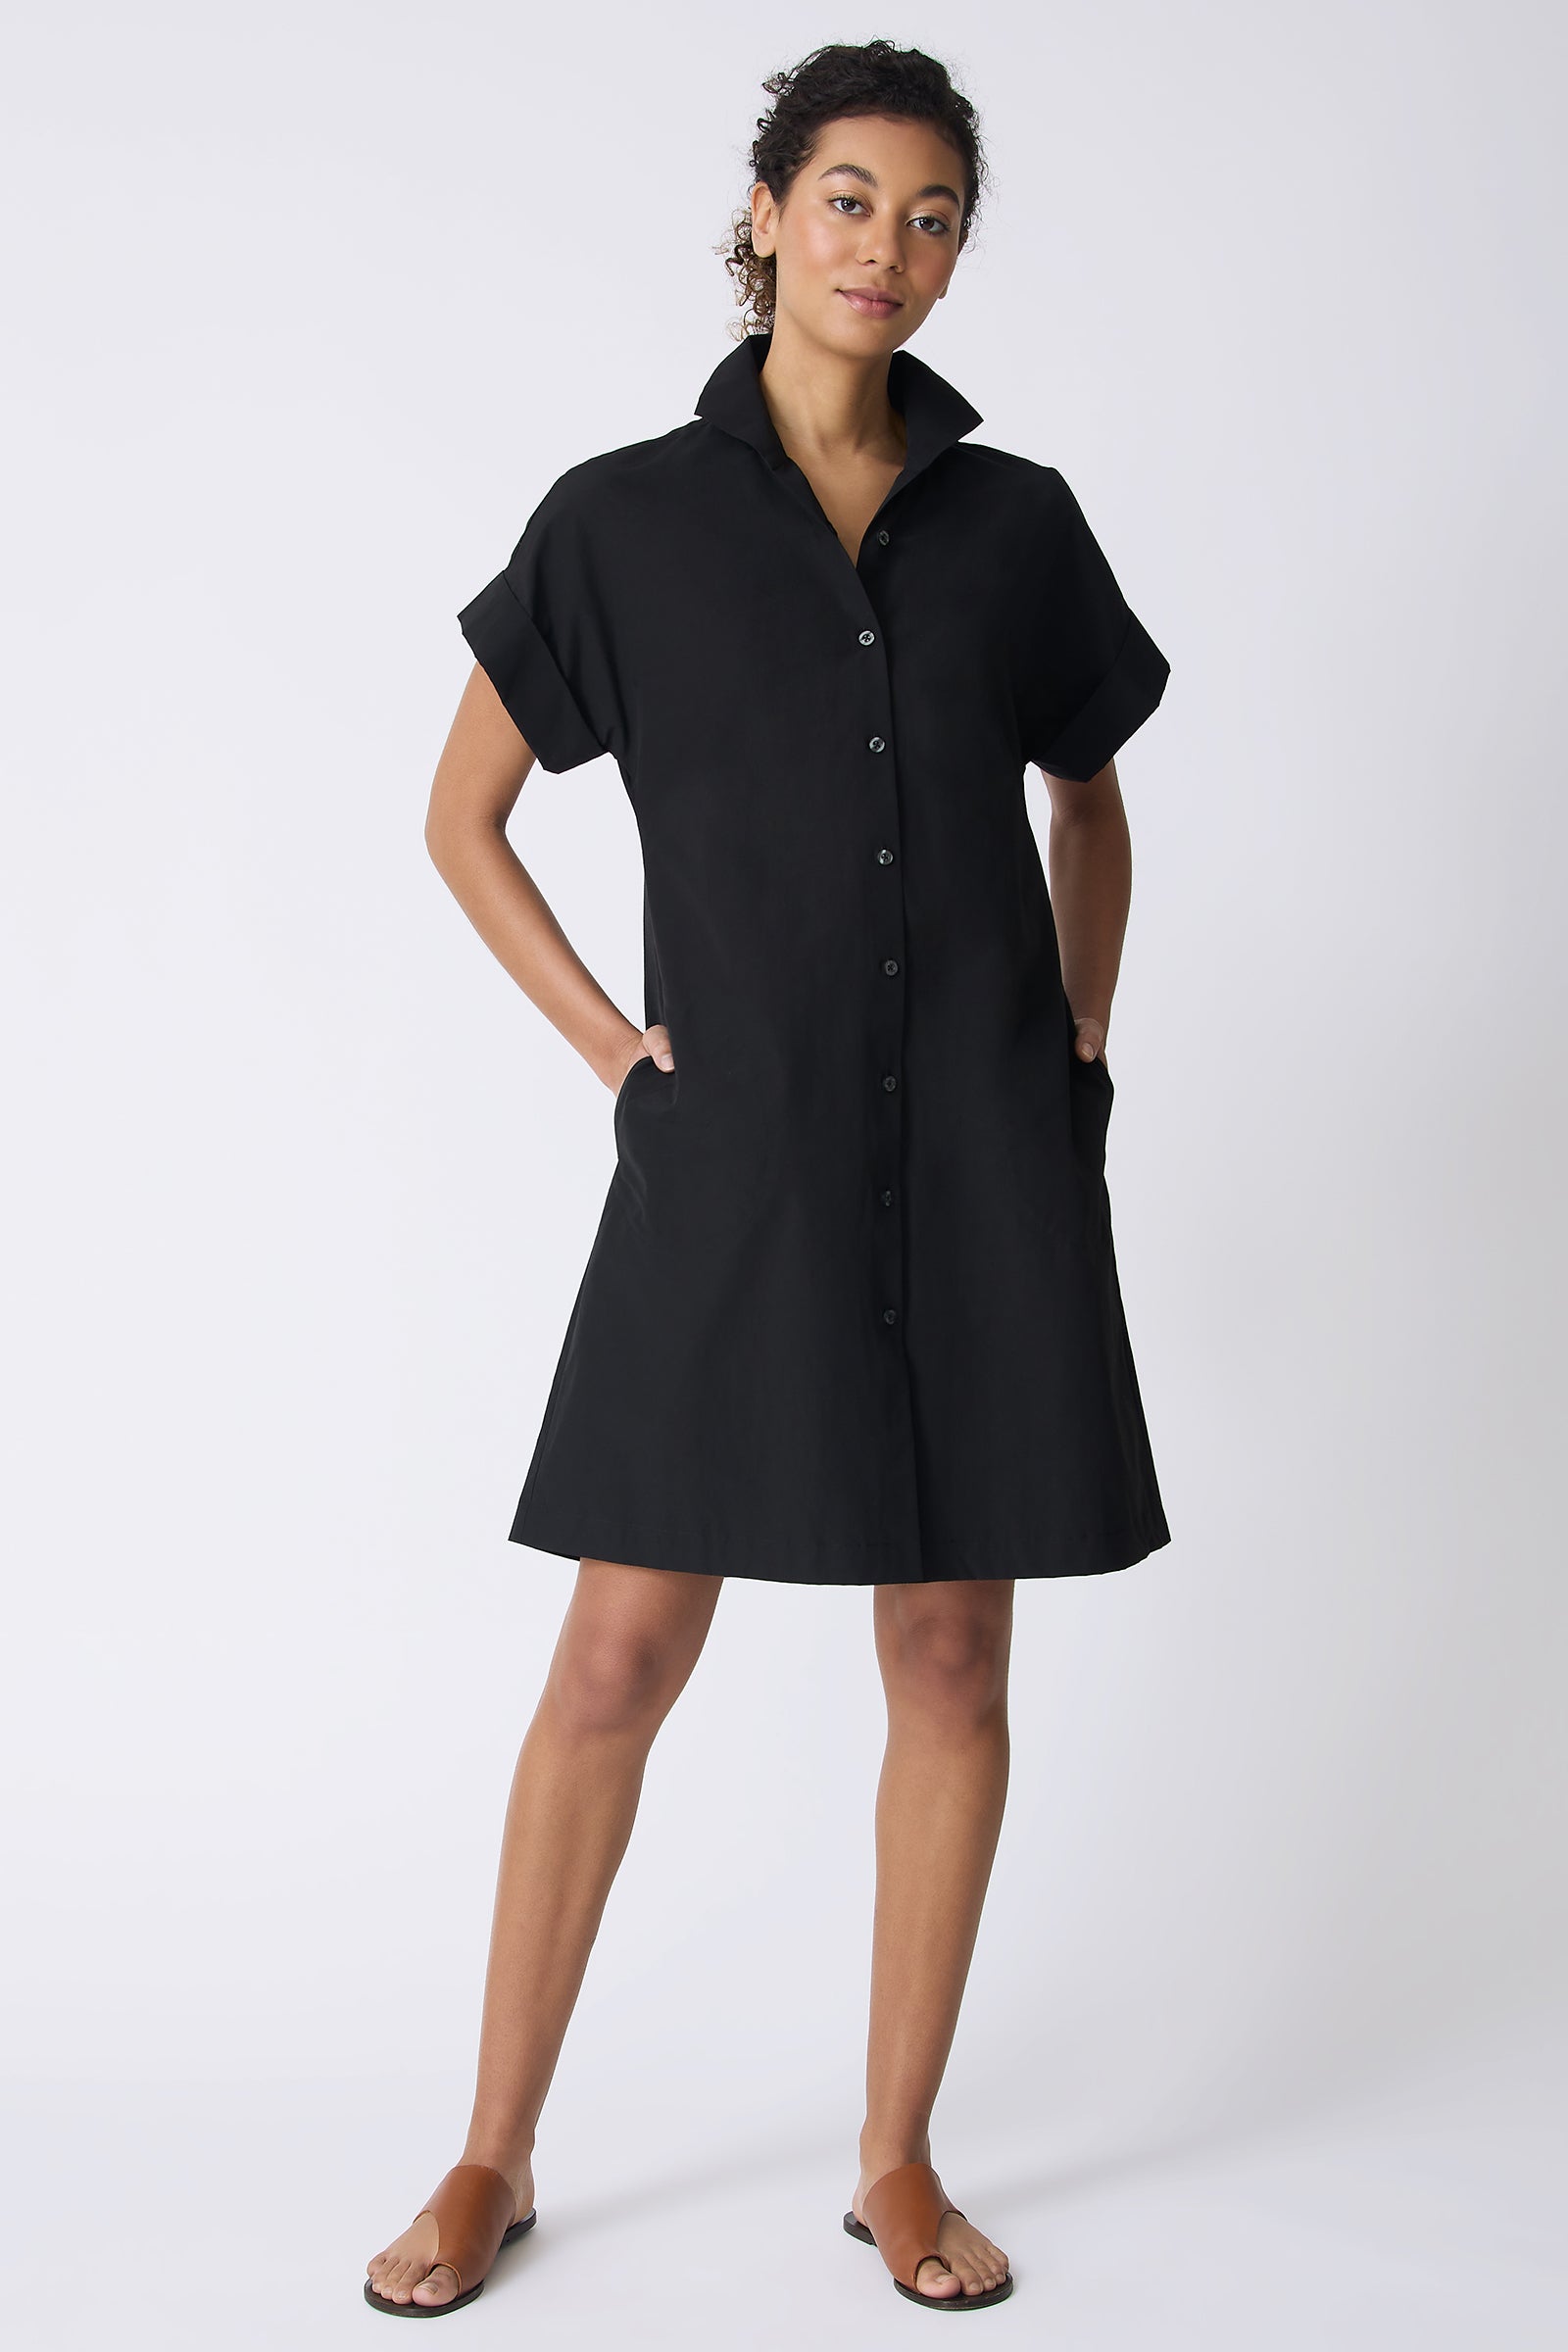 Kal Rieman Holly Kimono Dress in Black on model with hands in pockets full front view